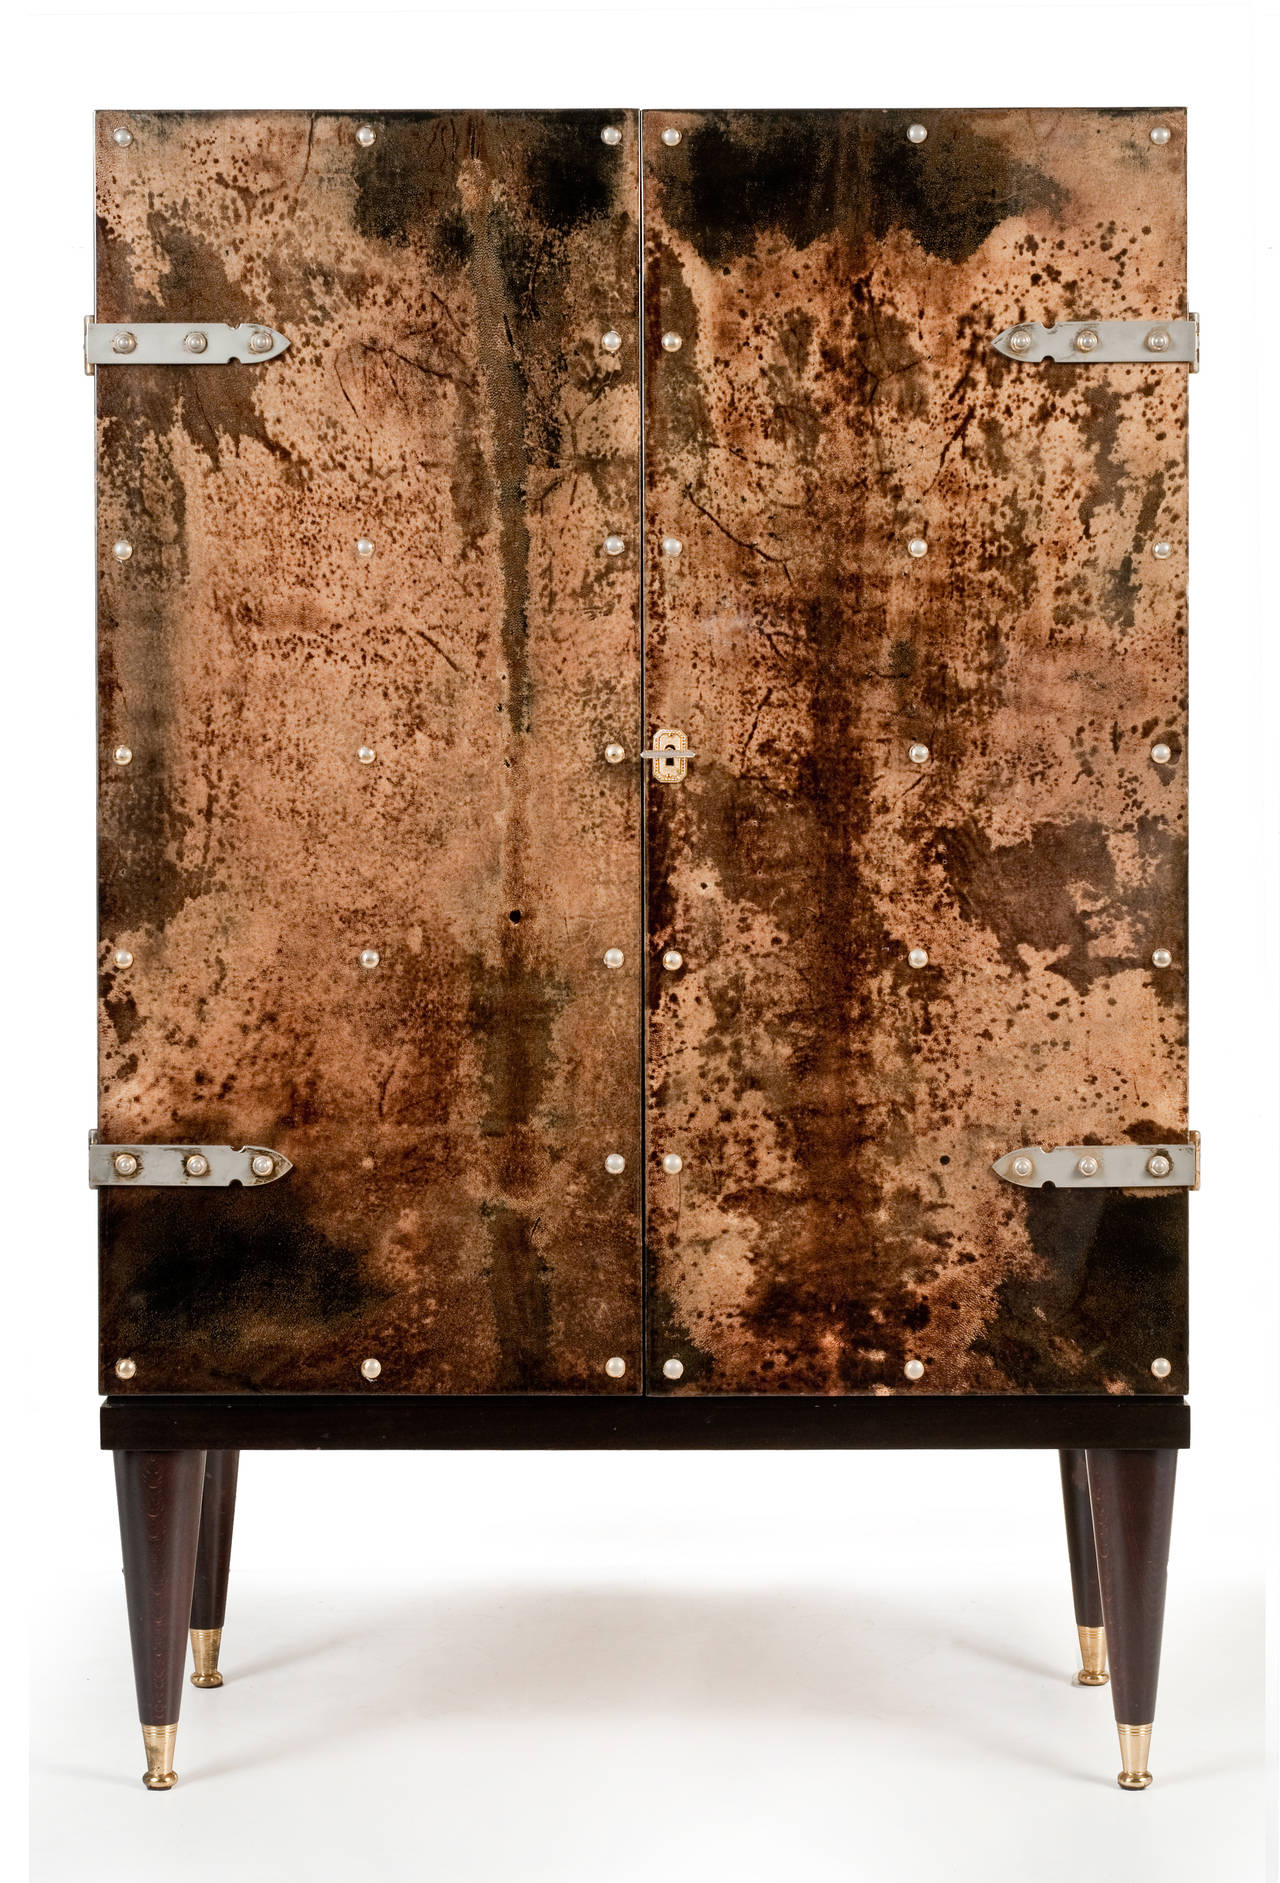 Aldo Tura rare mid-20th century Italian veneered goat hide, lacquered cocktail cabinet or bar.

This exceptional piece is very well photographed by Russell Winnell, so no words needed! 

This is part of my personal collection, it holds the